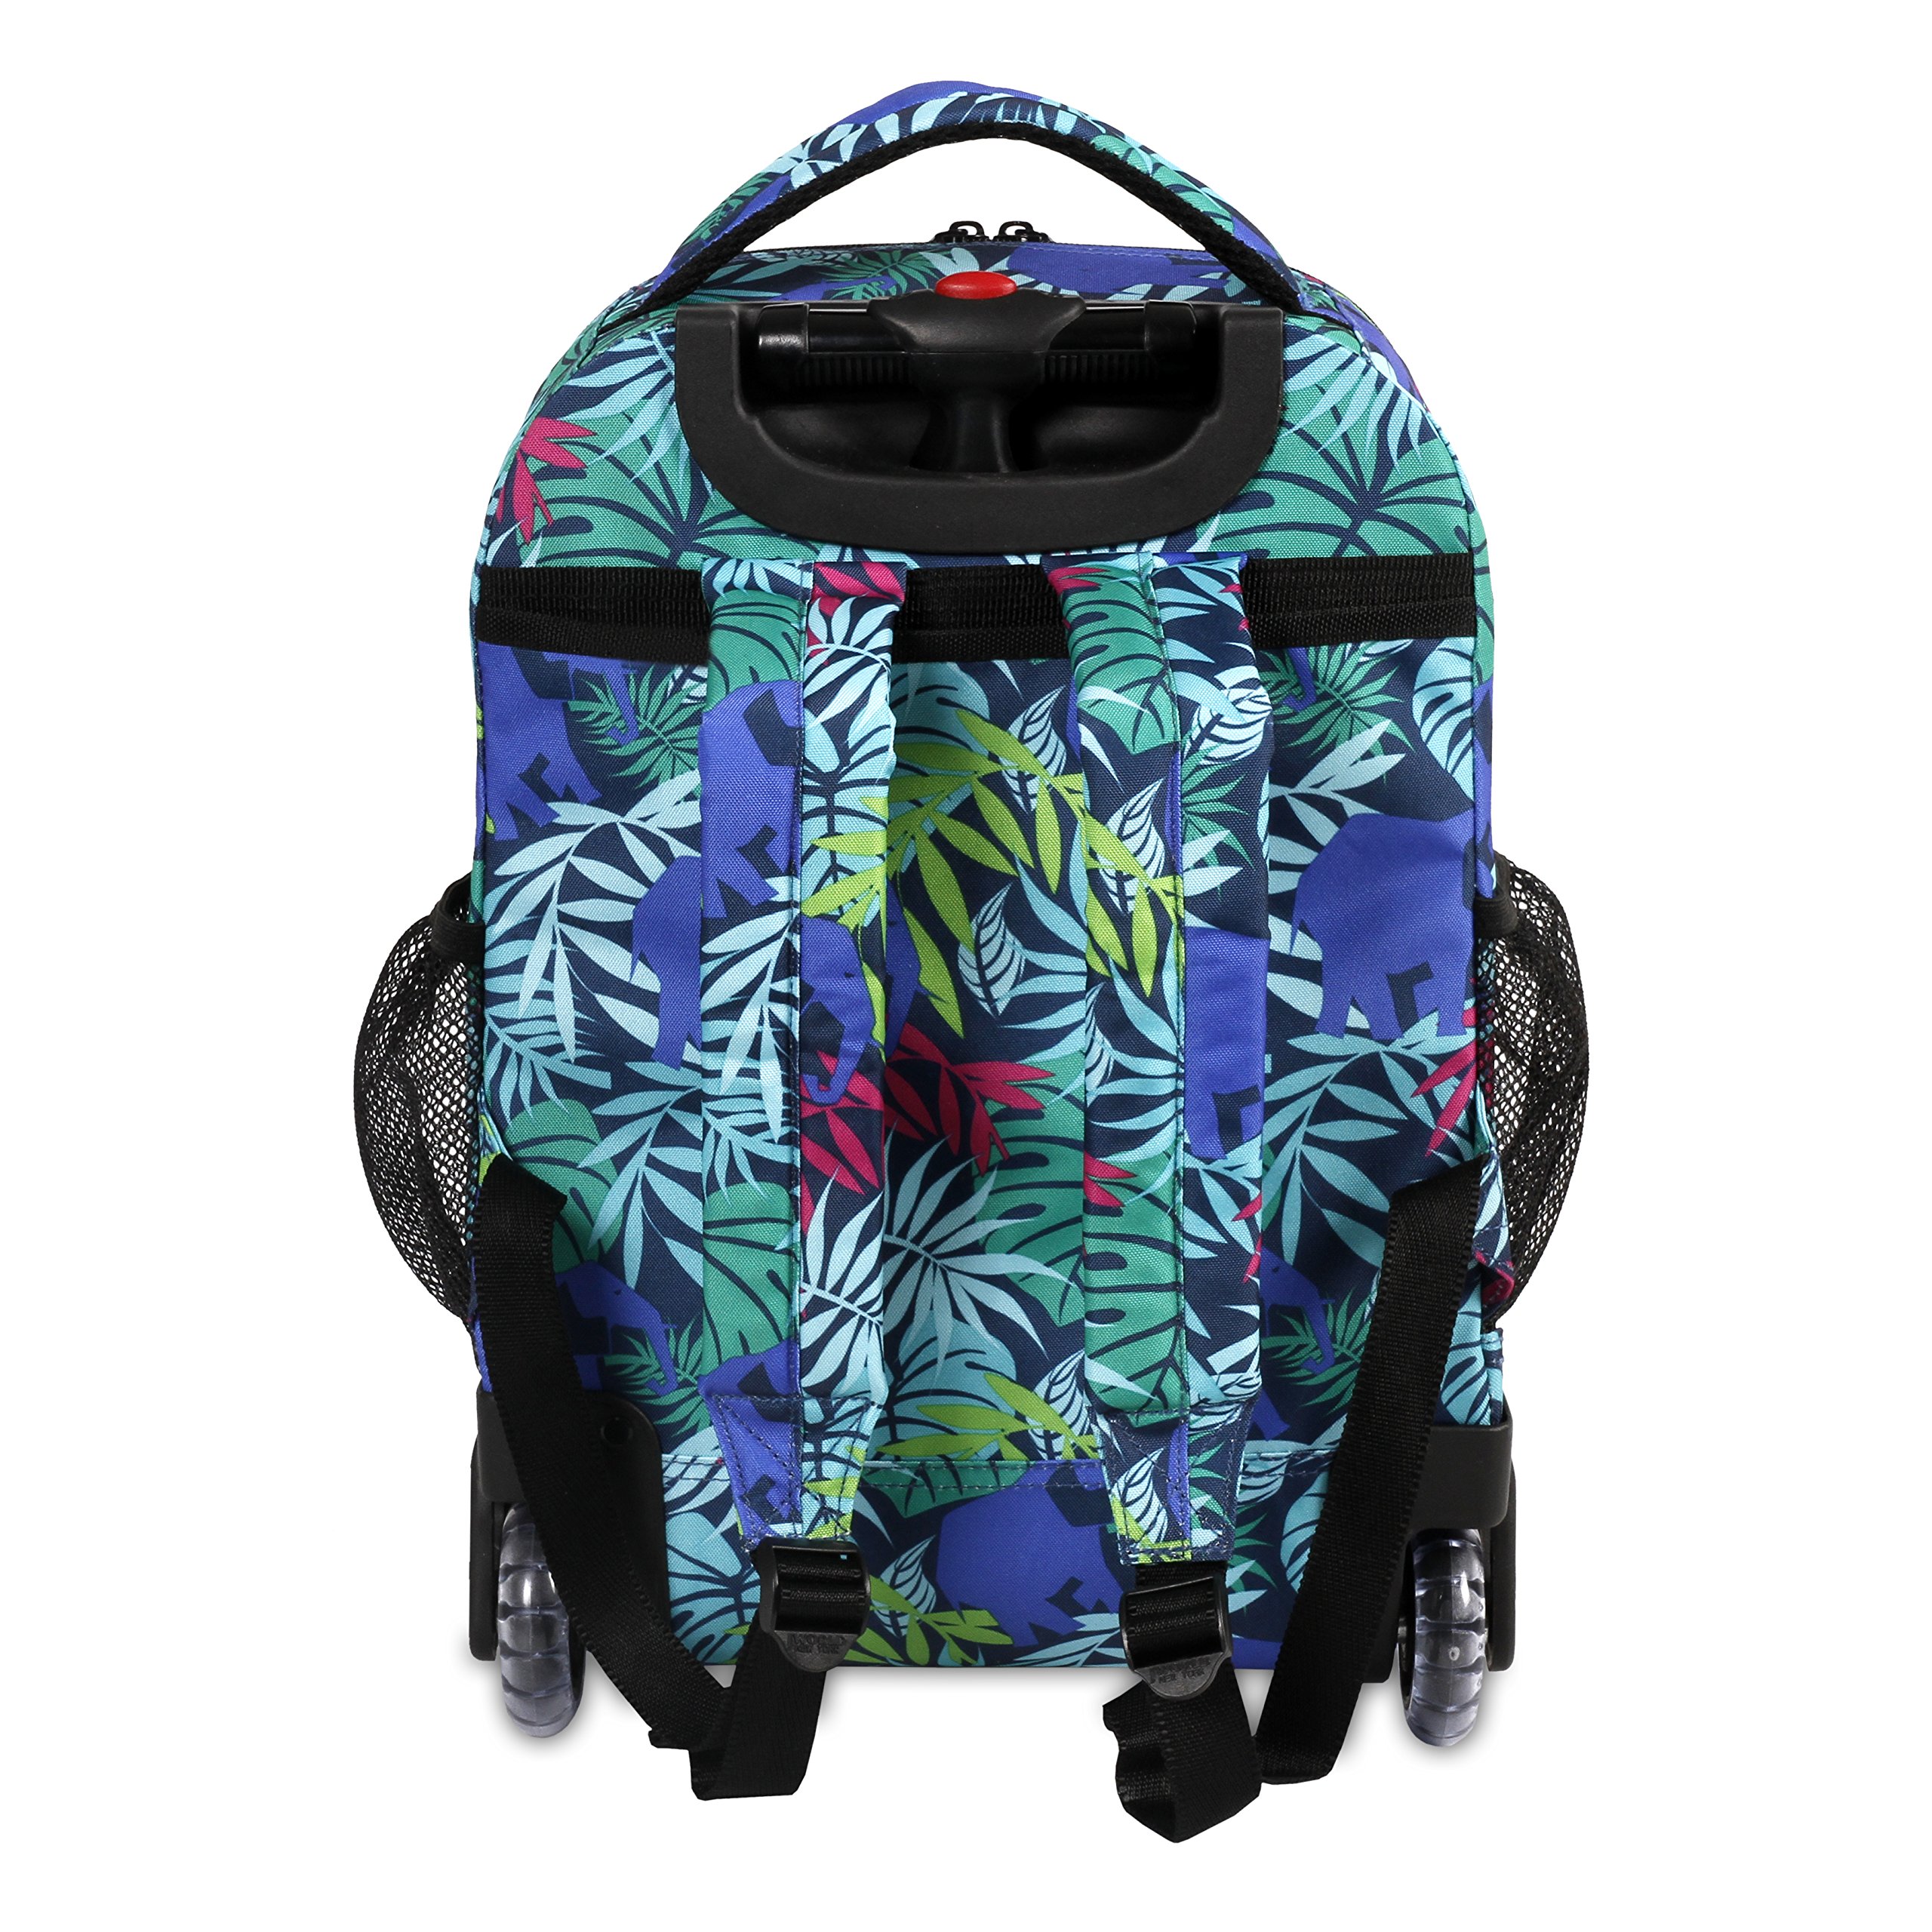 J World New York Sunny Rolling Backpack for Kids and Adults, Savanna, One Size